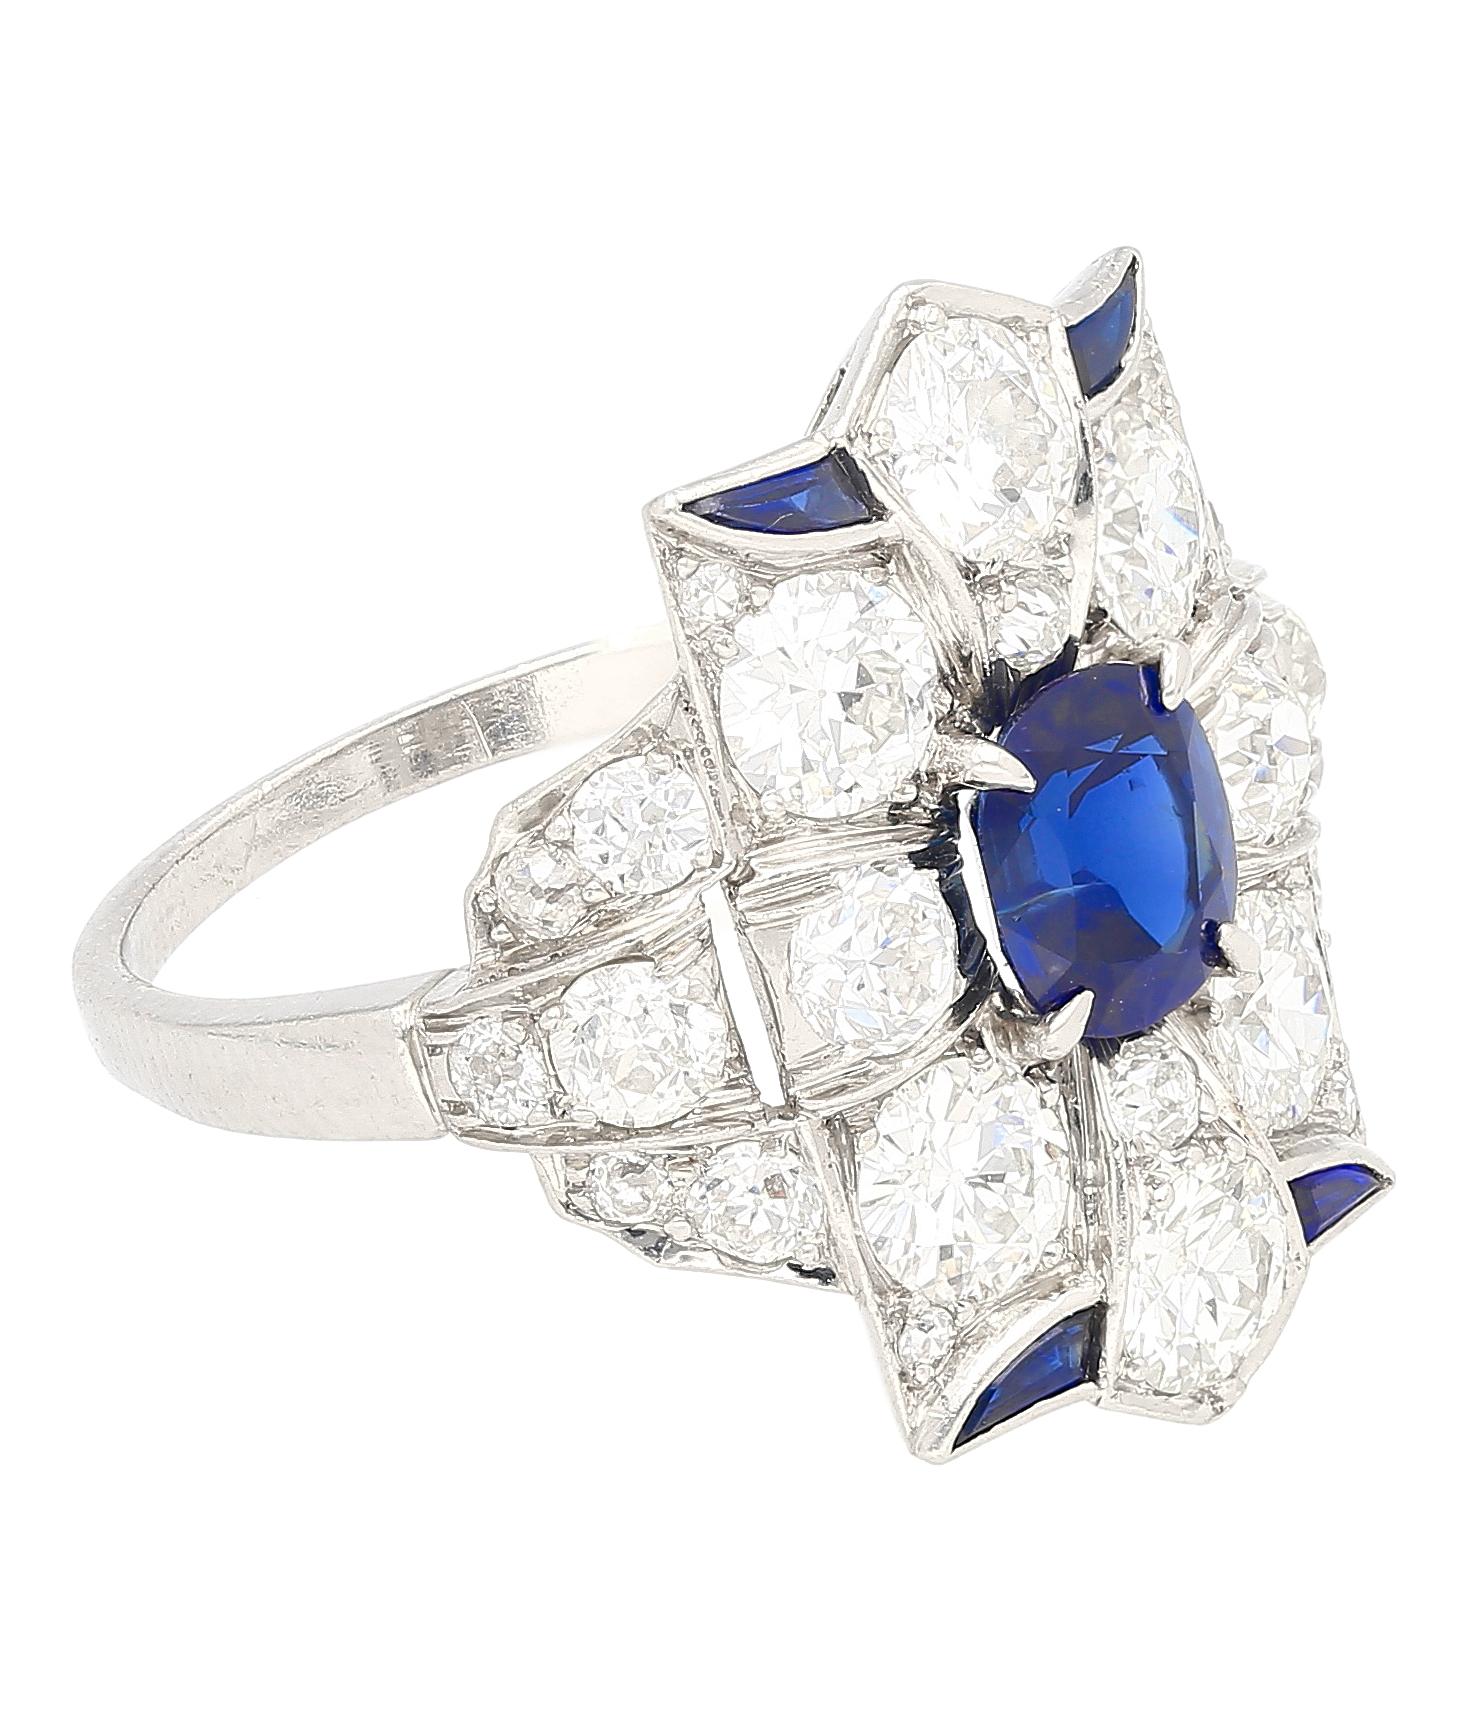 Vintage AGL Certified No Heat Blue Sapphire & Old Euro Cut Diamond Platinum Ring In Excellent Condition For Sale In Miami, FL